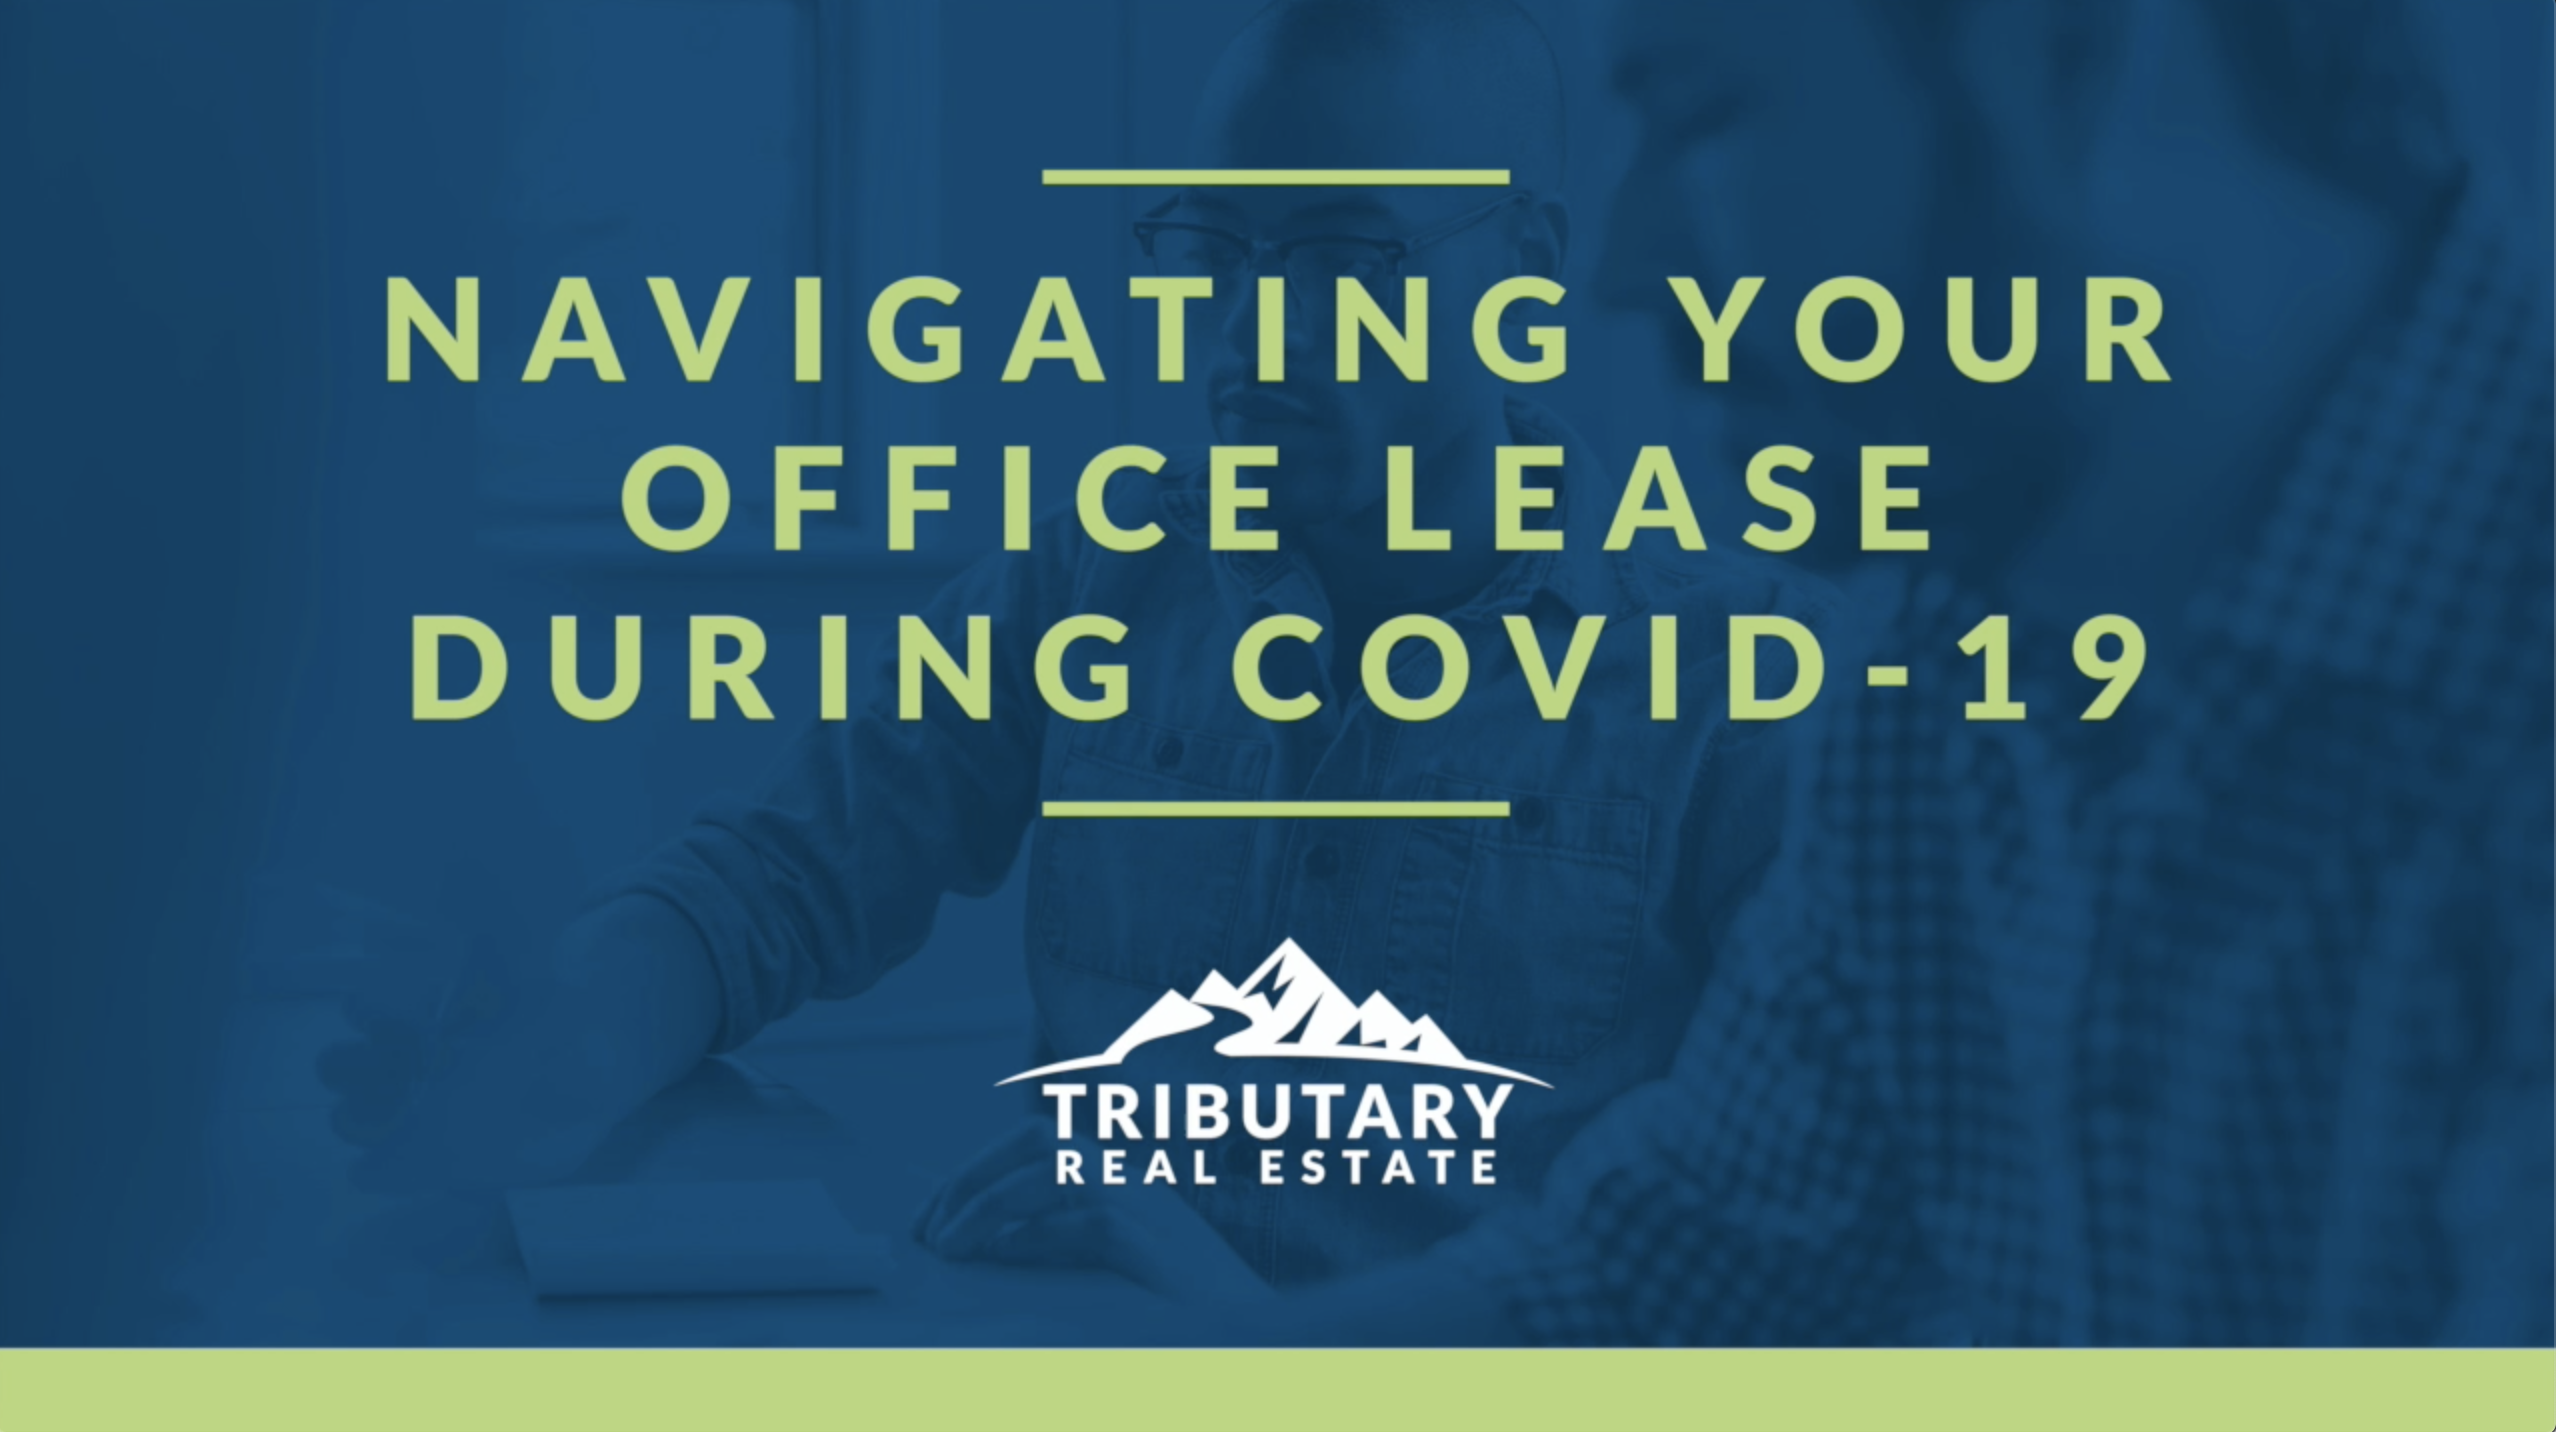 Navigating your office lease during COVID-19